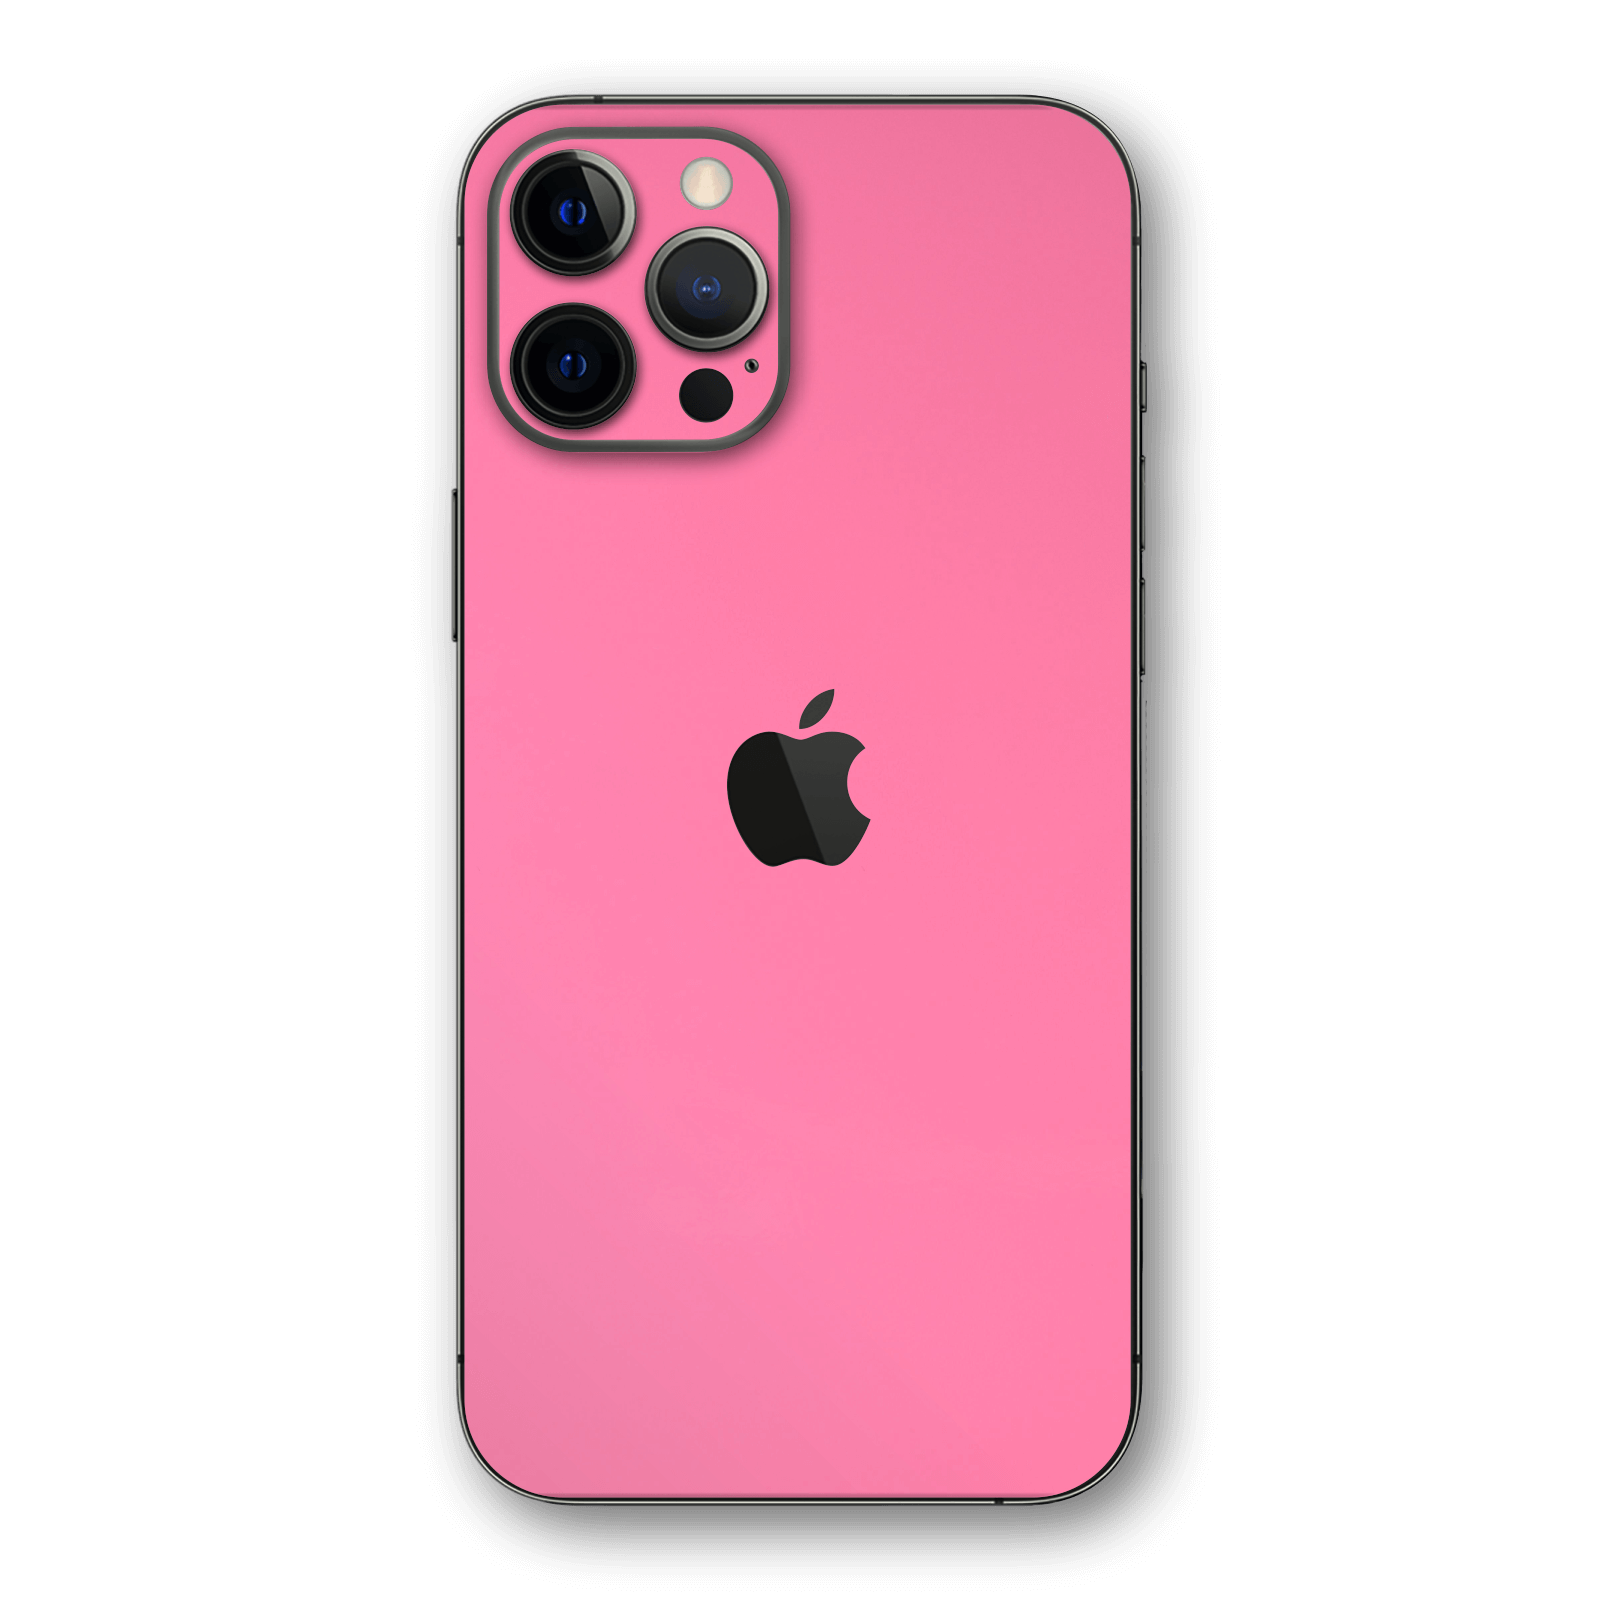 Iphone 12 Pro Max Gloss Hot Pink Skin Wrap Decal Easyskinz